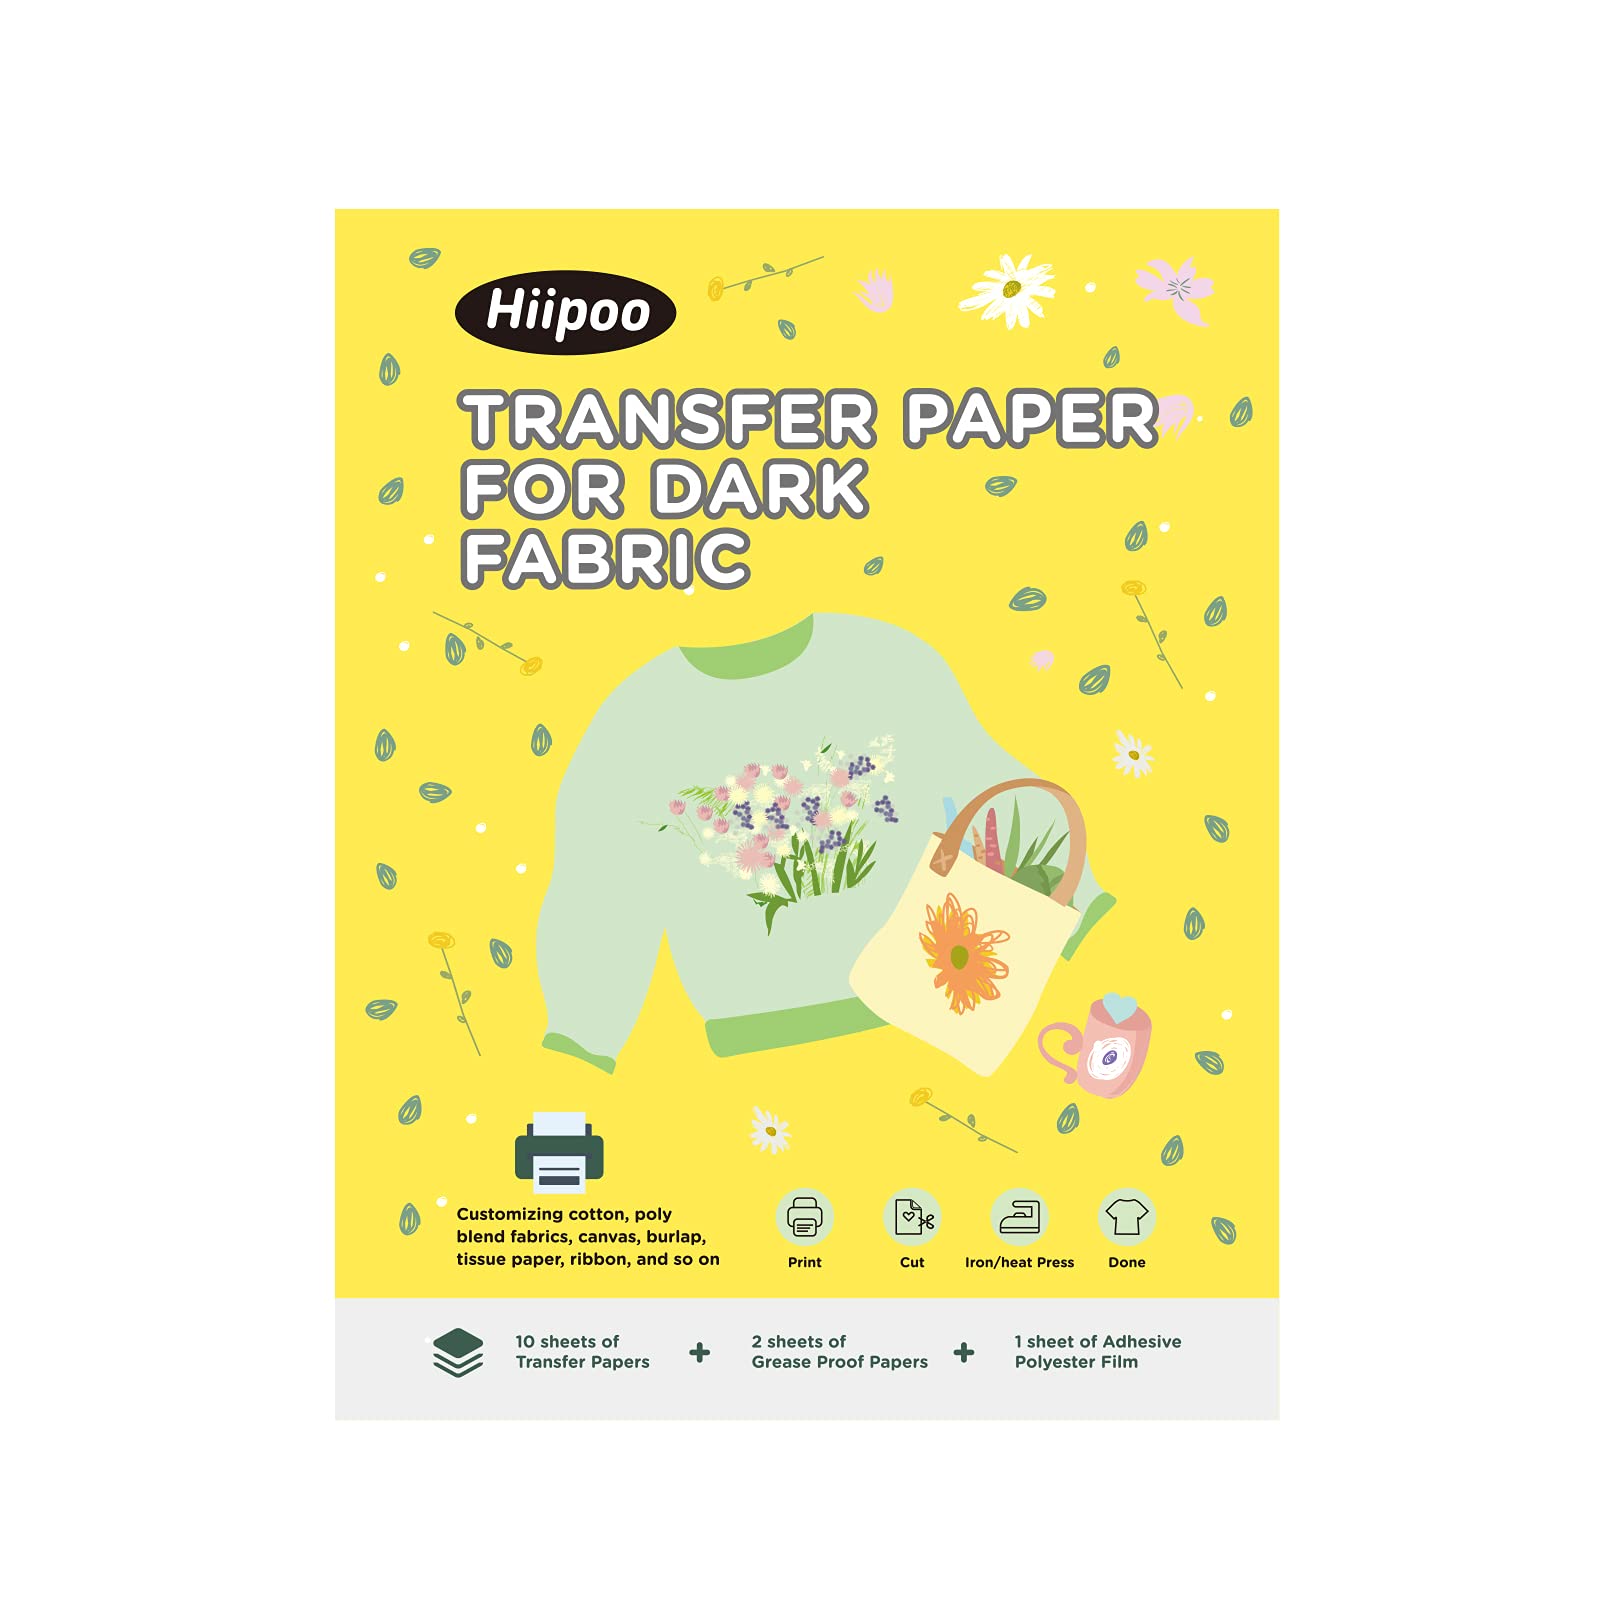  Hiipoo Heat Transfer Paper 8.5x11 Iron-on Transfer Paper for  T-Shirt 10 Sheets Printable and Washable Light Transfer Paper for Inkjet  Printer : Arts, Crafts & Sewing